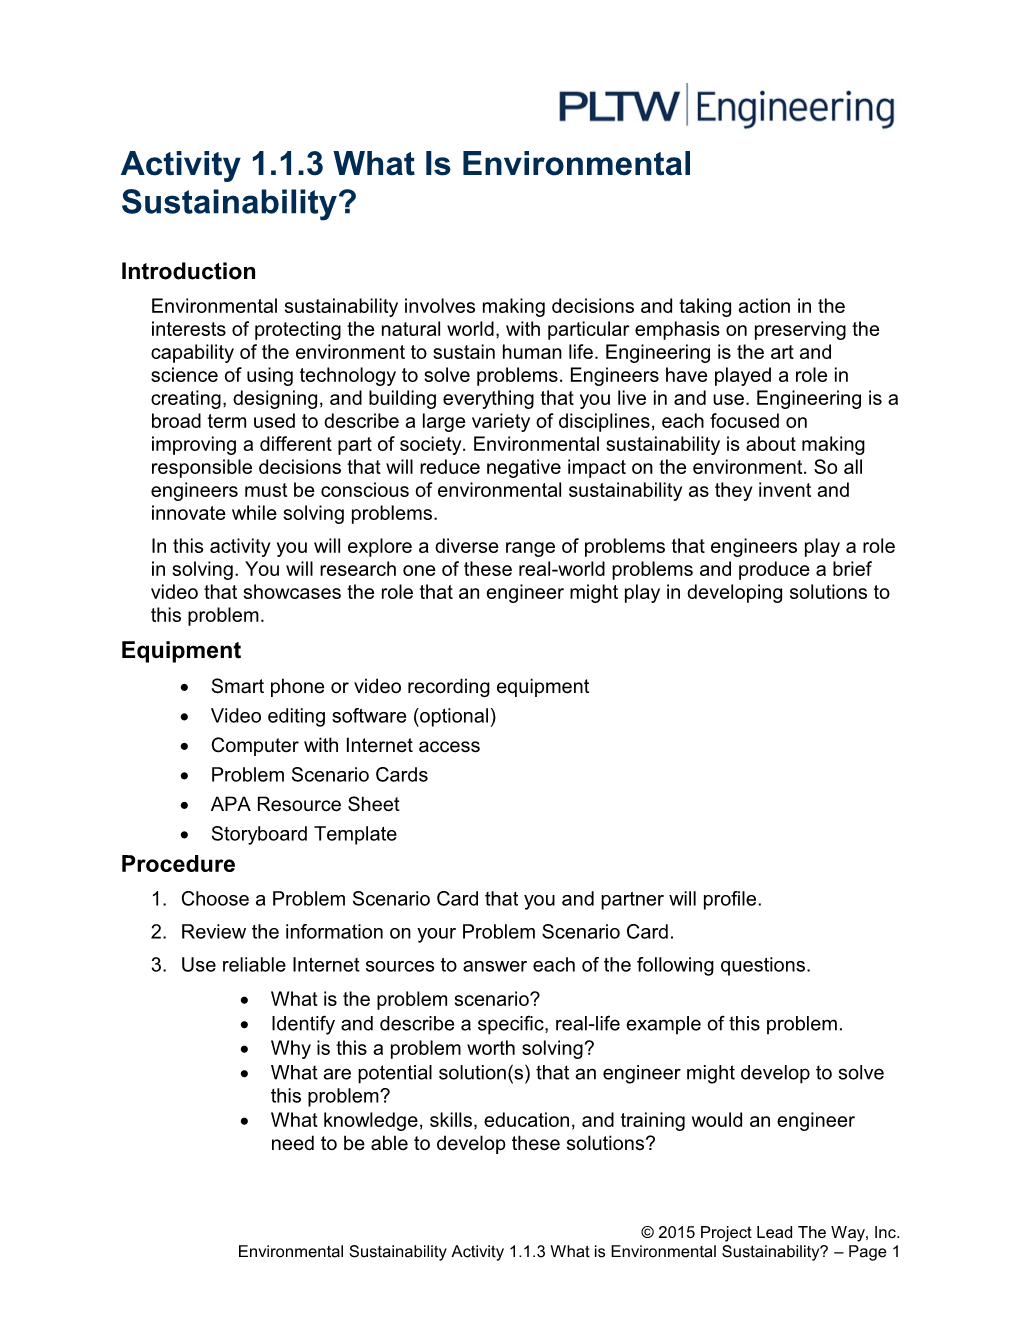 Activity 1.1.3 What Is Environmental Sustainability? s1